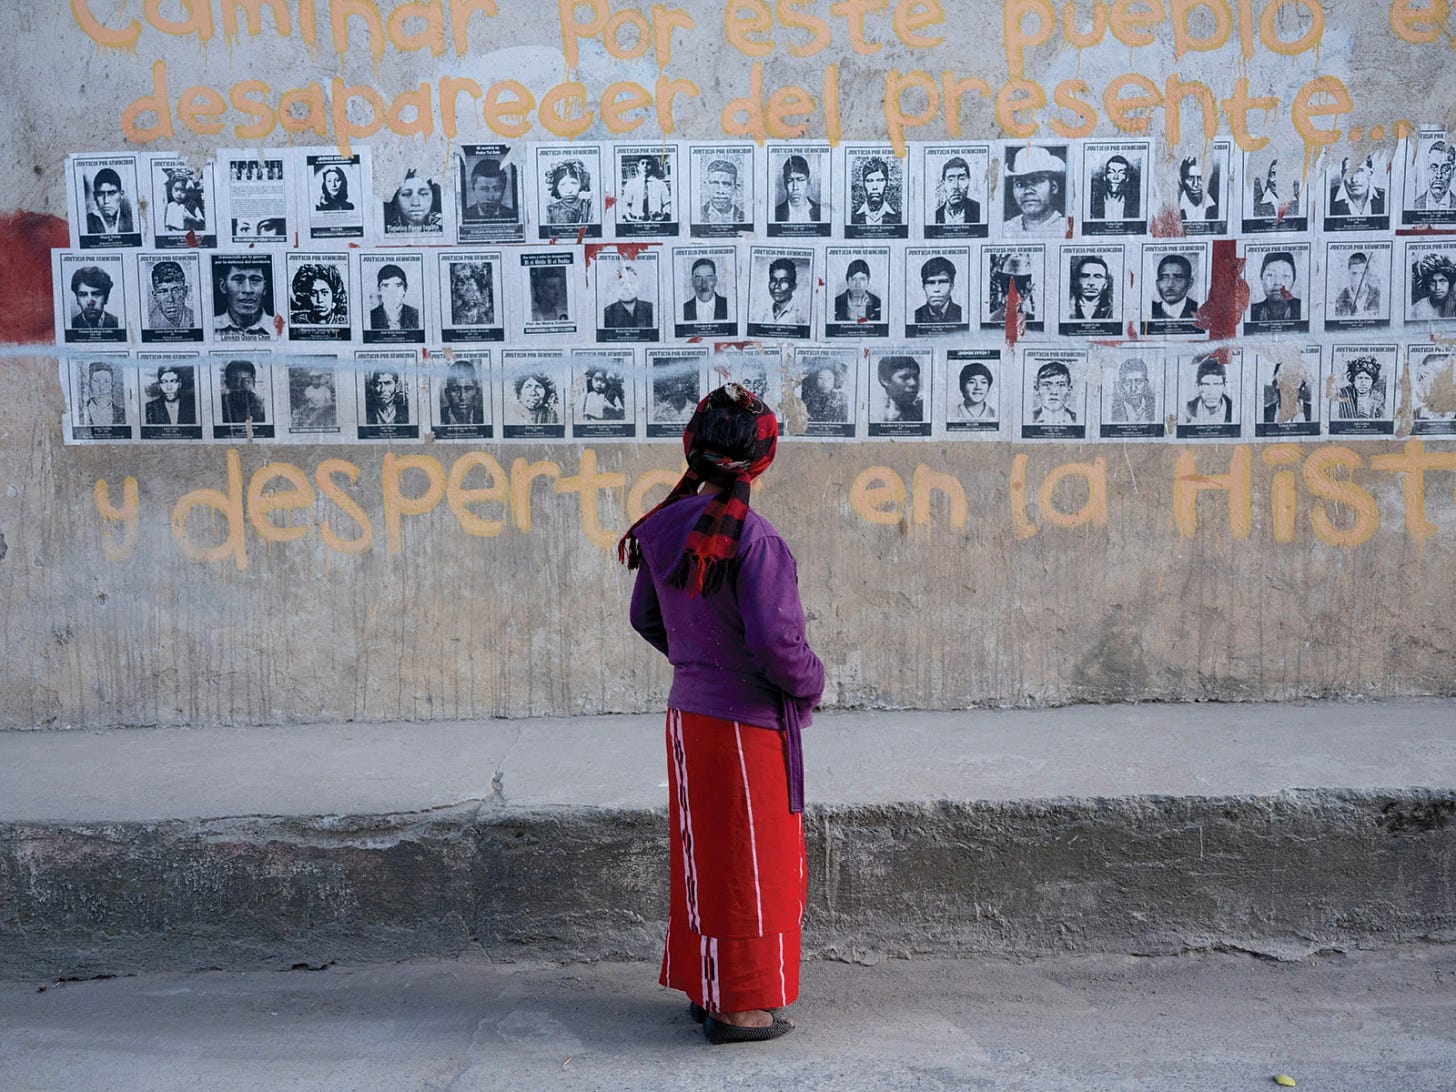 Pictures of disappeared civilians posted on a wall, Nebaj, Guatemala